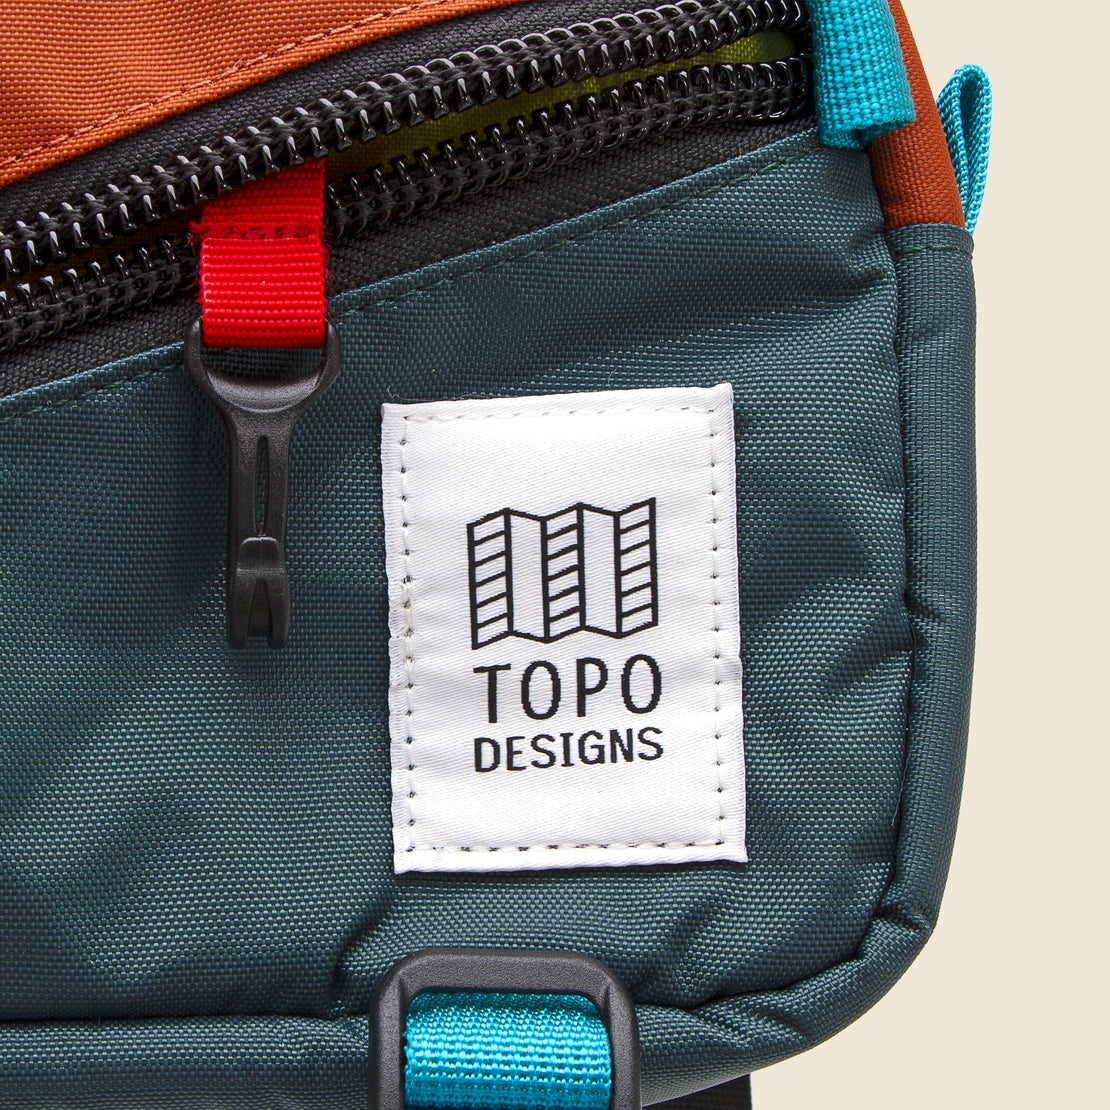 Mini Quick Pack - Botanic Green/Clay - Topo Designs - STAG Provisions - Accessories - Bags / Luggage